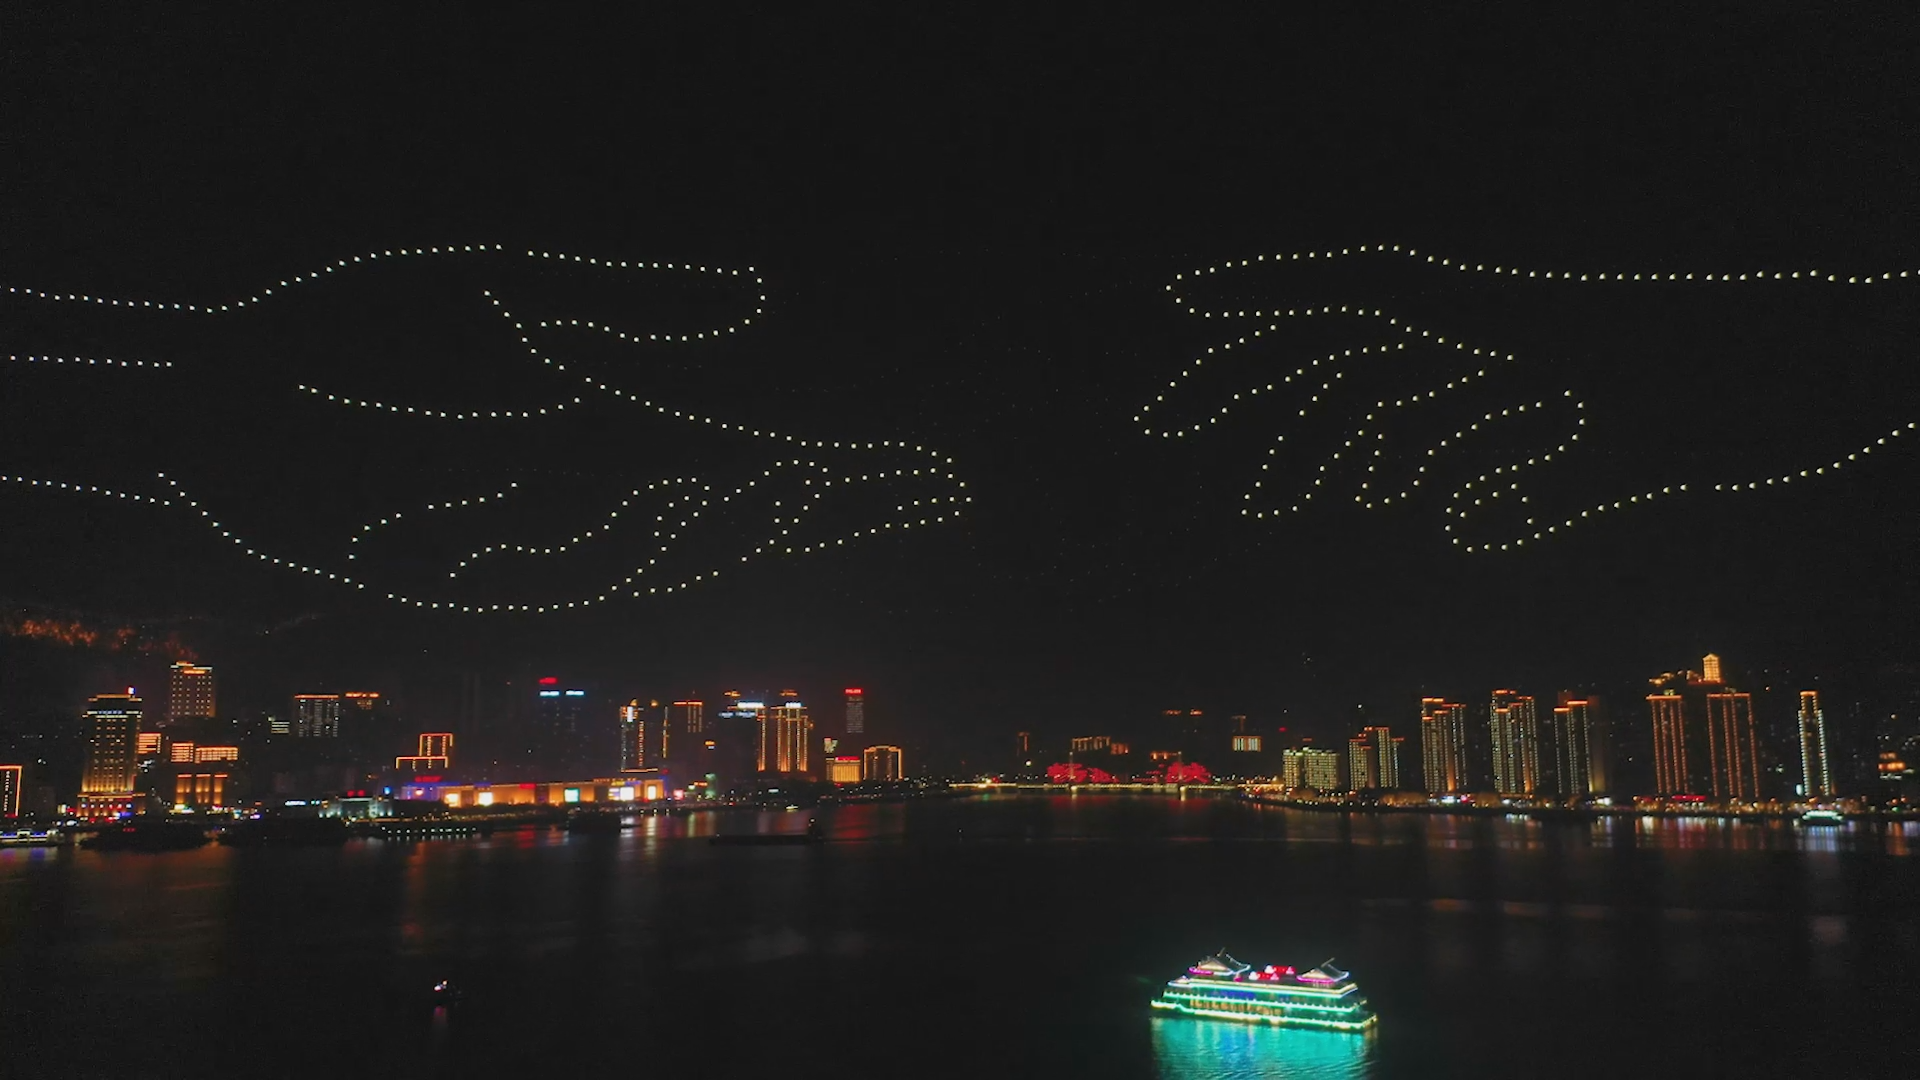 drone show 2022, Drone light show painting, Drone light show YouTube, Vivid drone show